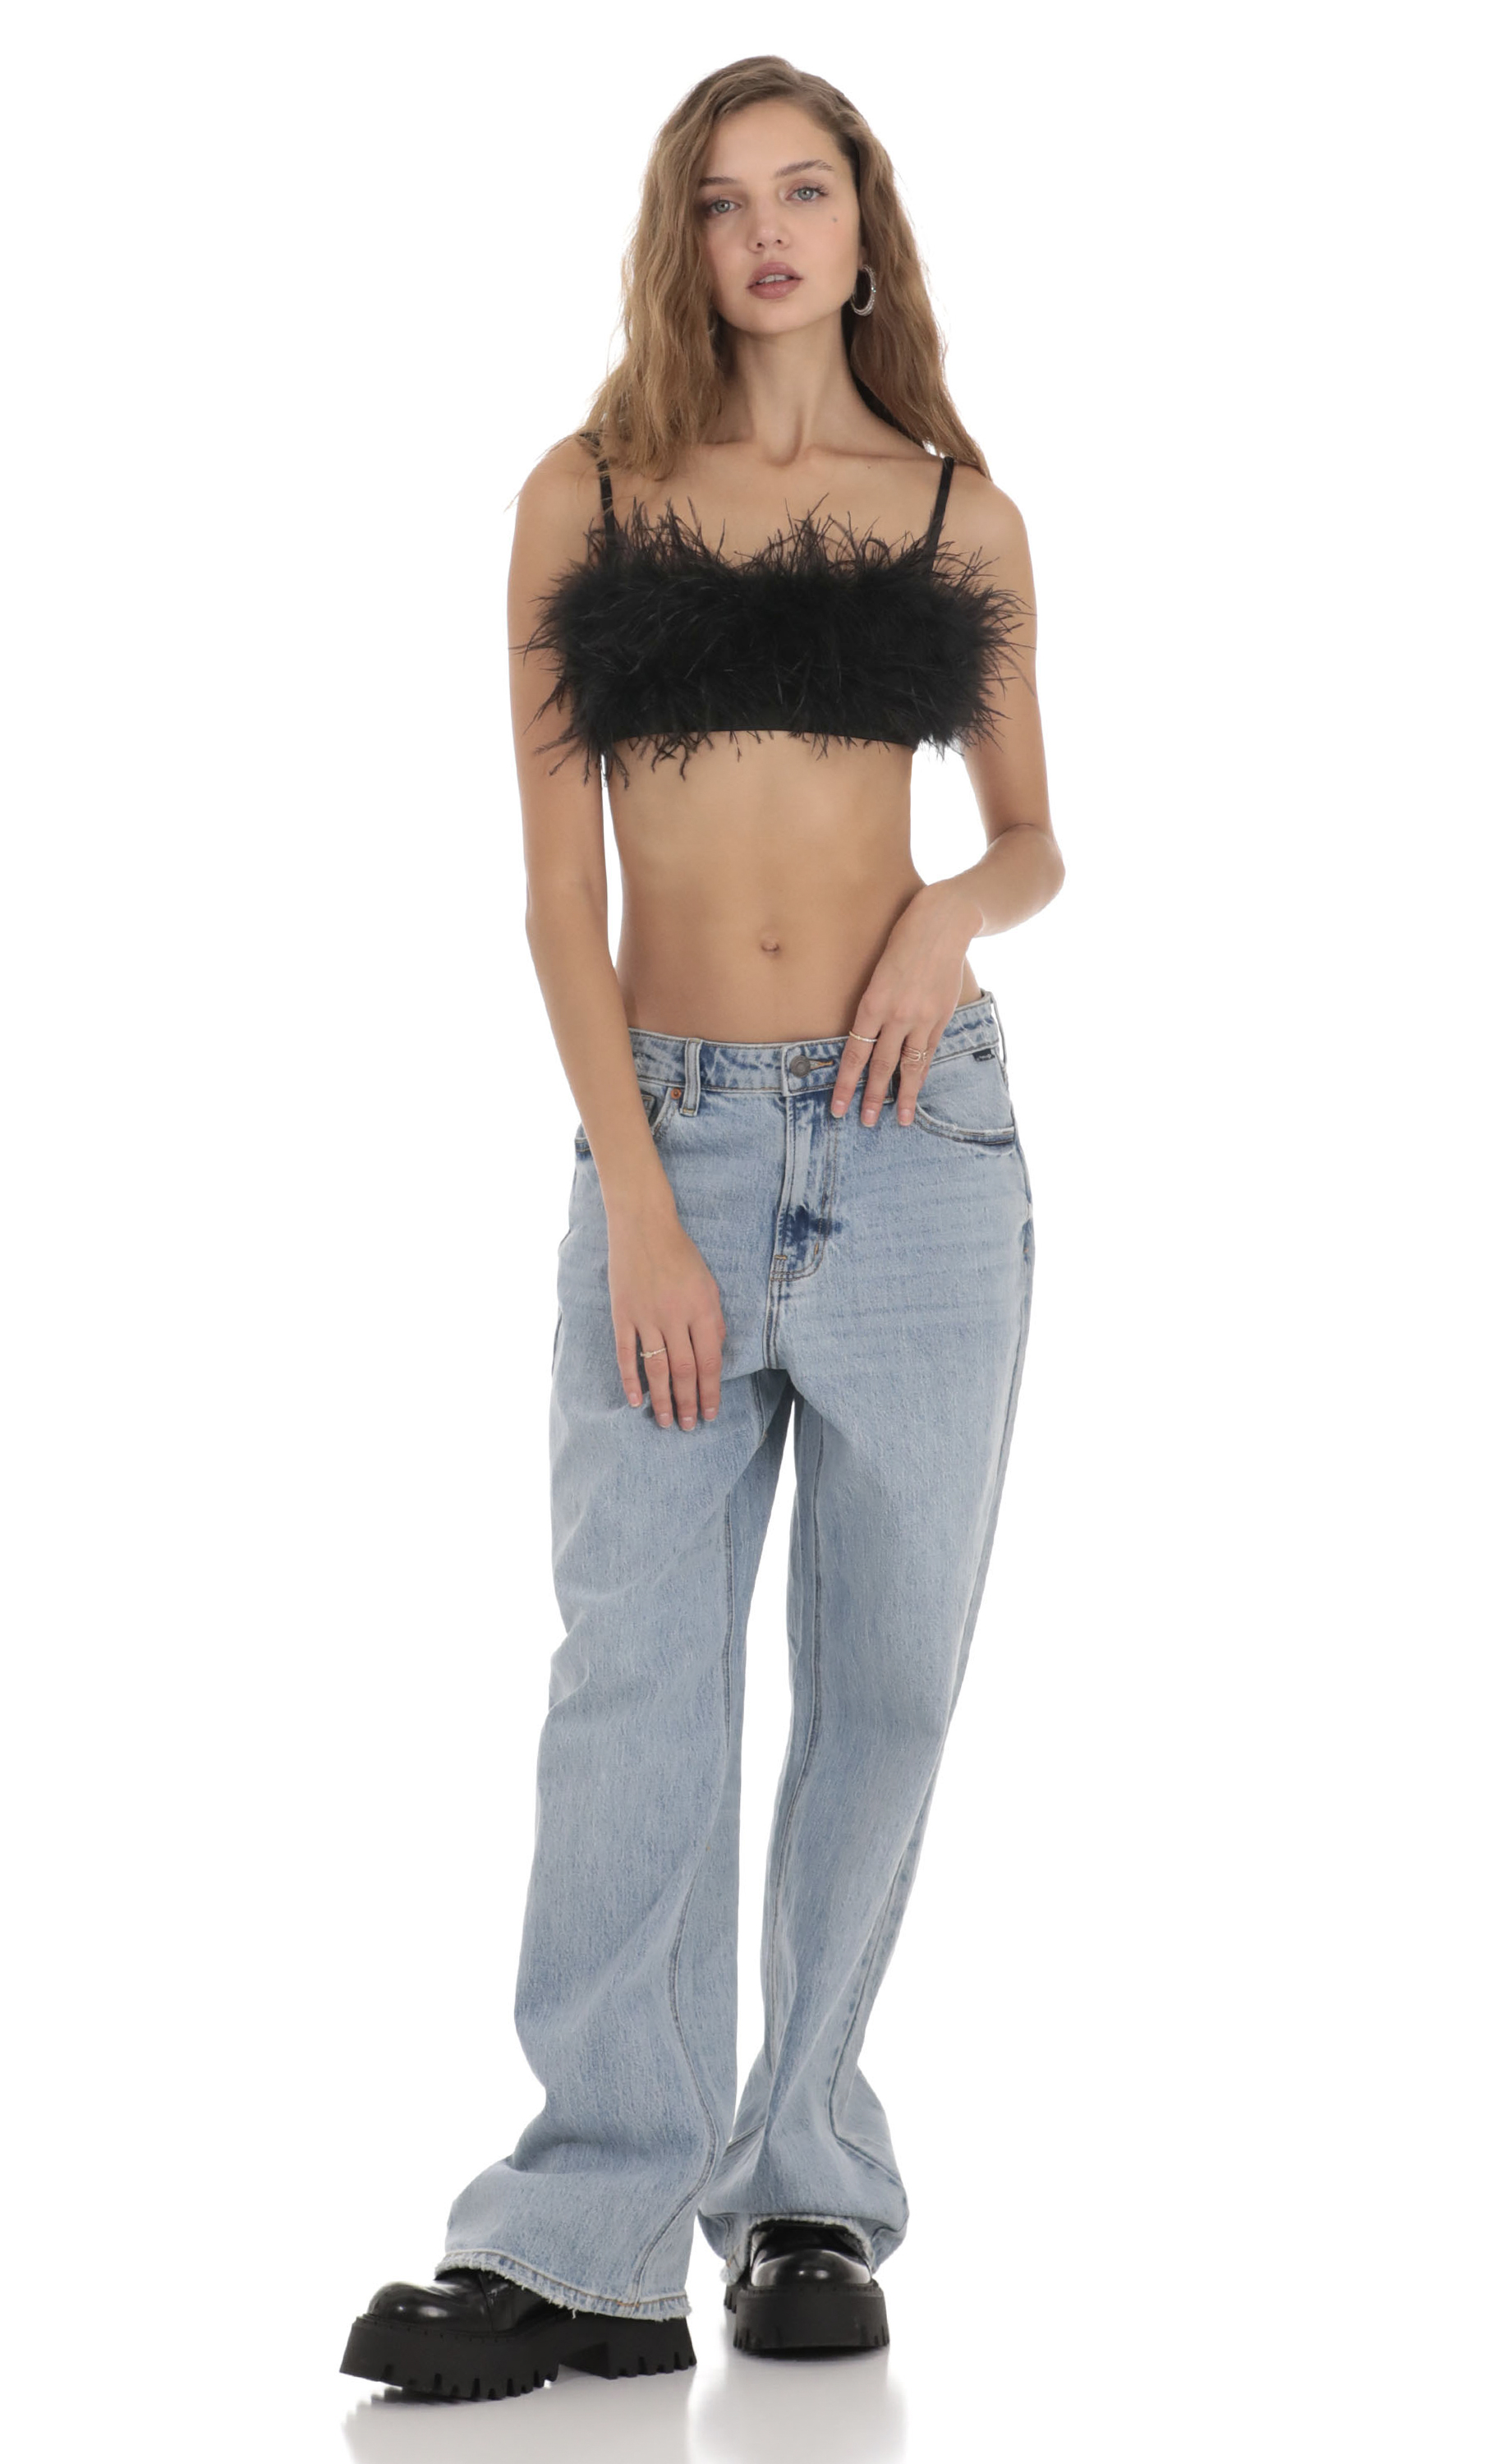 Feather Bralette Top in Black